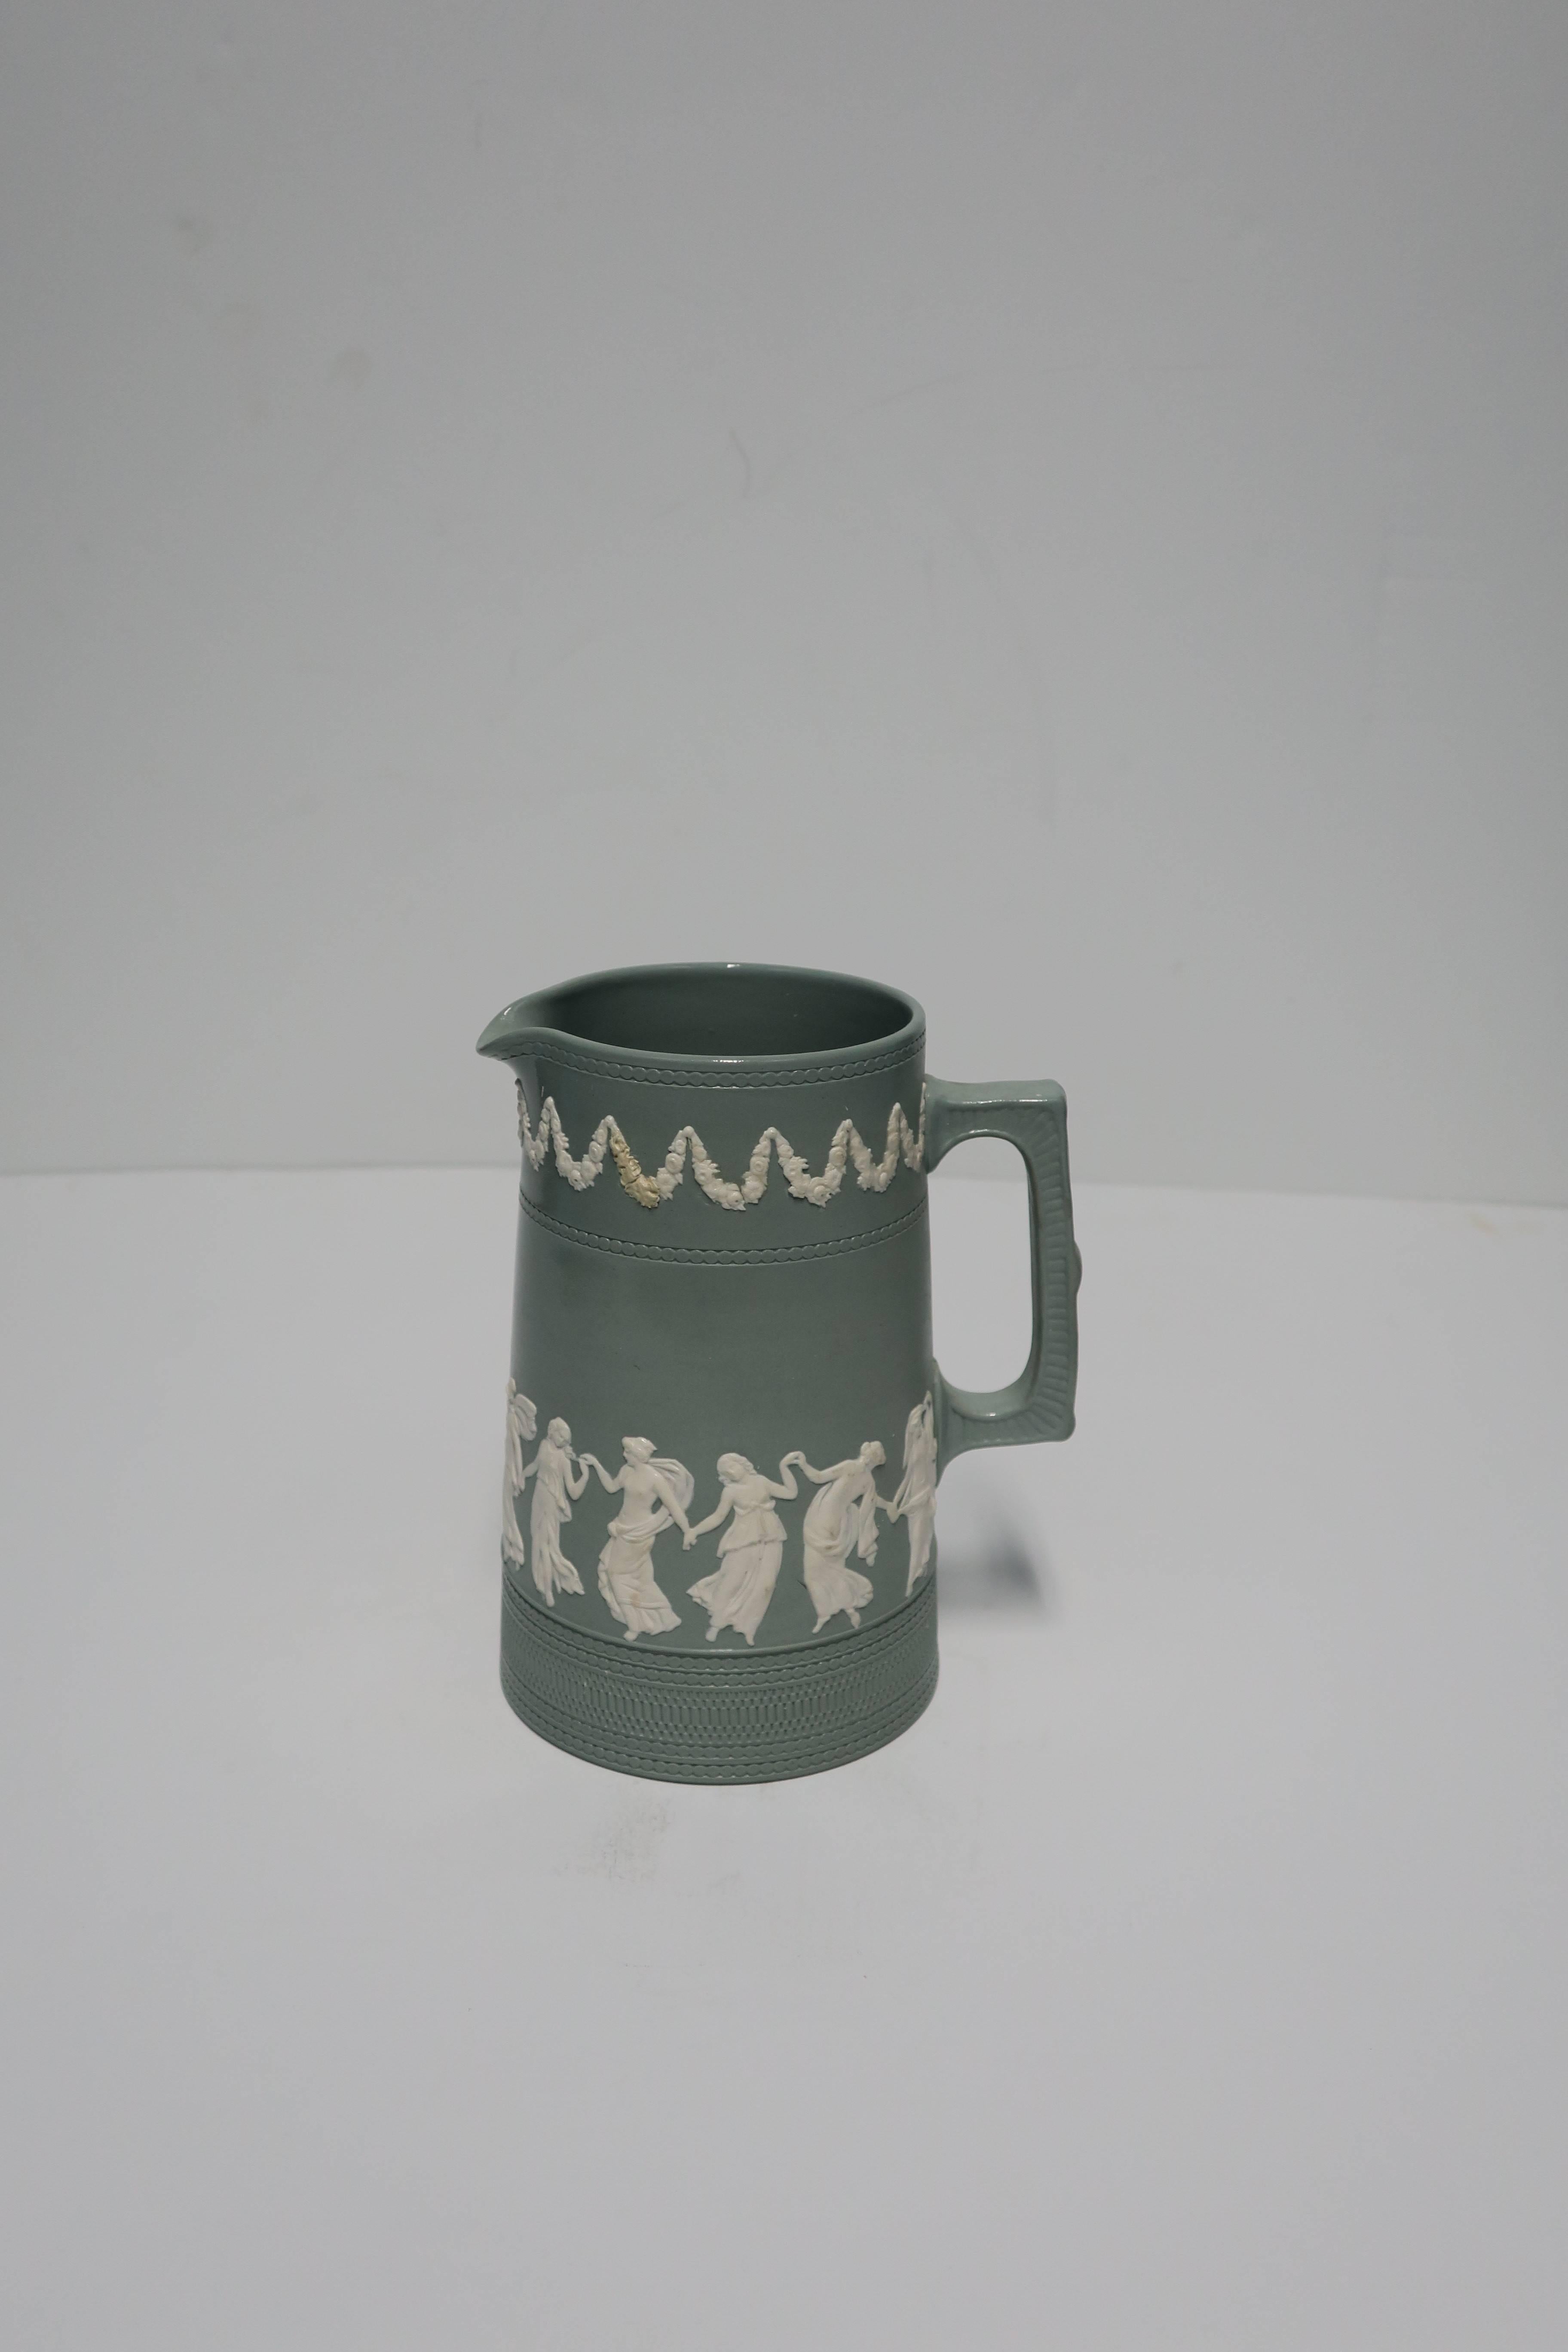 Neoclassical Green & White Jasperware Pitcher by Copeland, England, circa 19th c For Sale 2